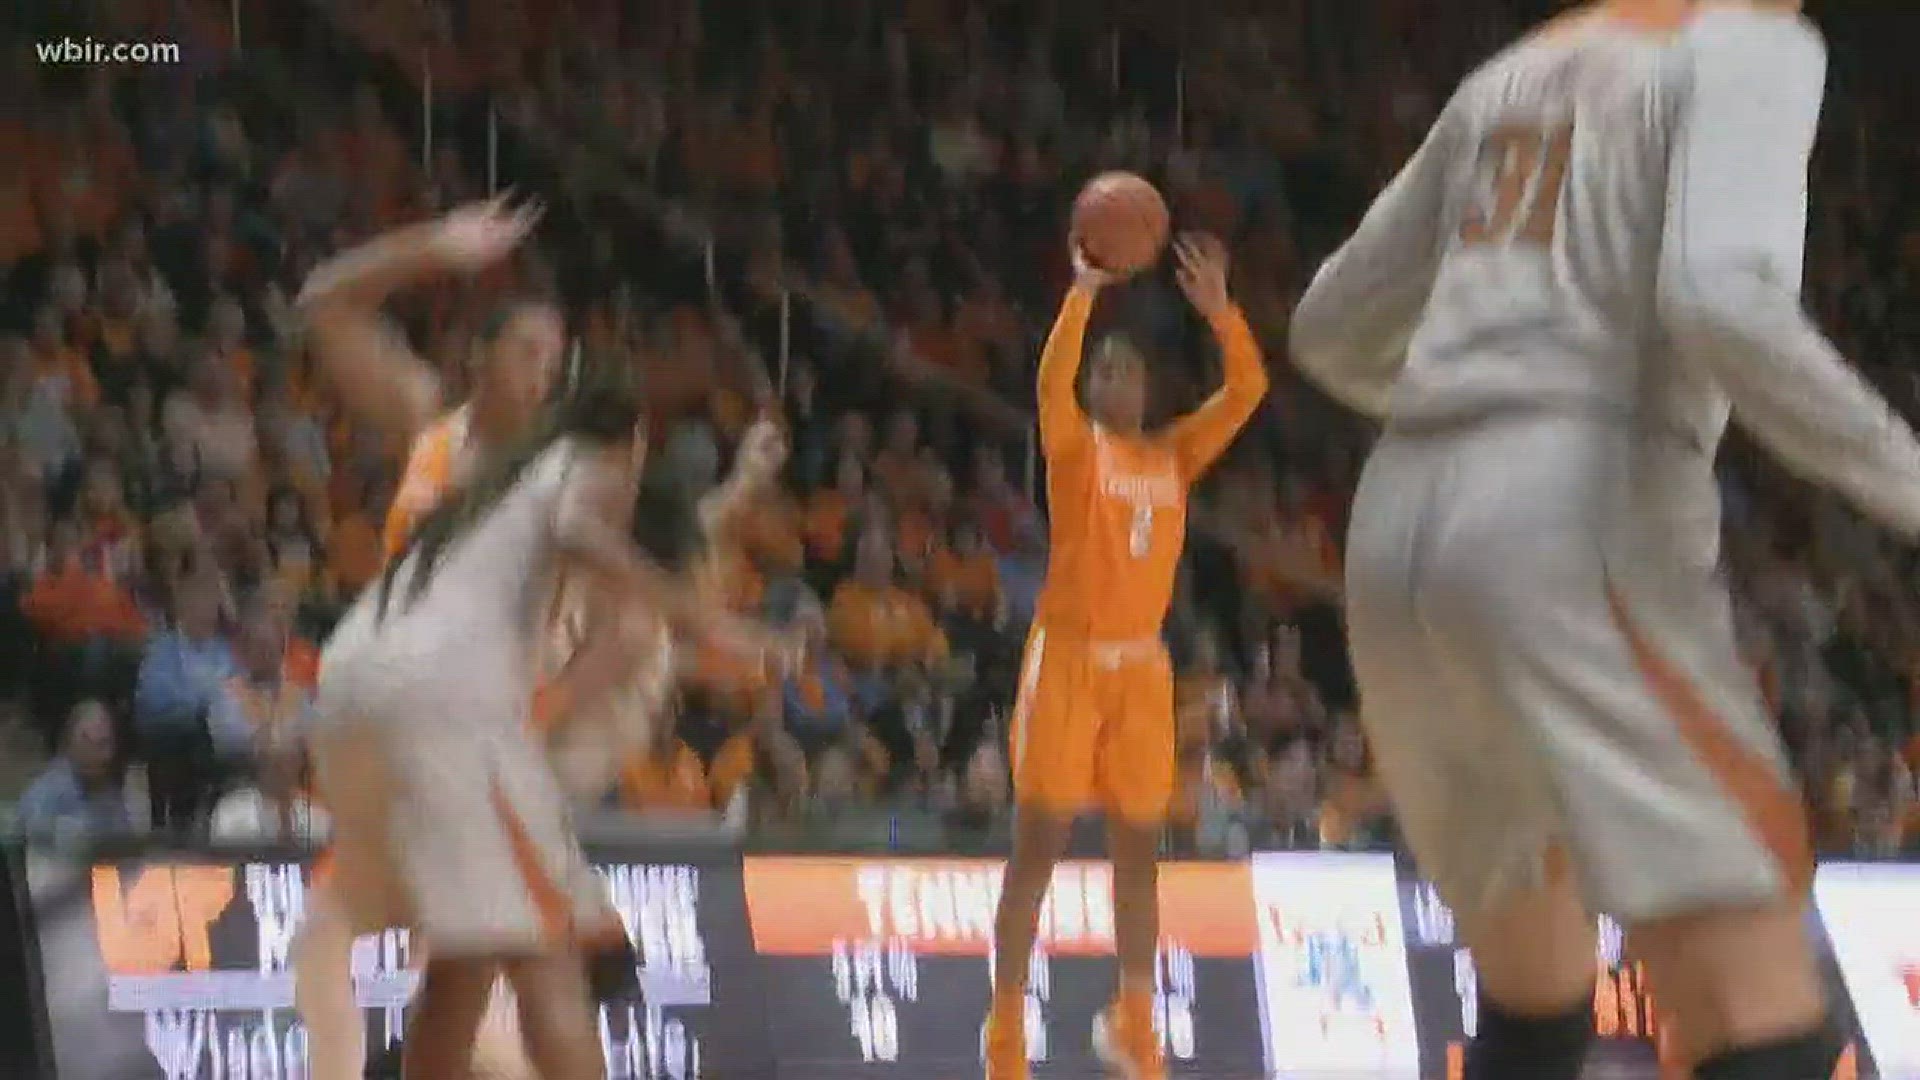 The 2017-2018 Lady Vols are one of five Tennessee teams to start a season 13-0. Maria Cornelius of MoxleyCarmichael.com and GoVols247 joins for insight.